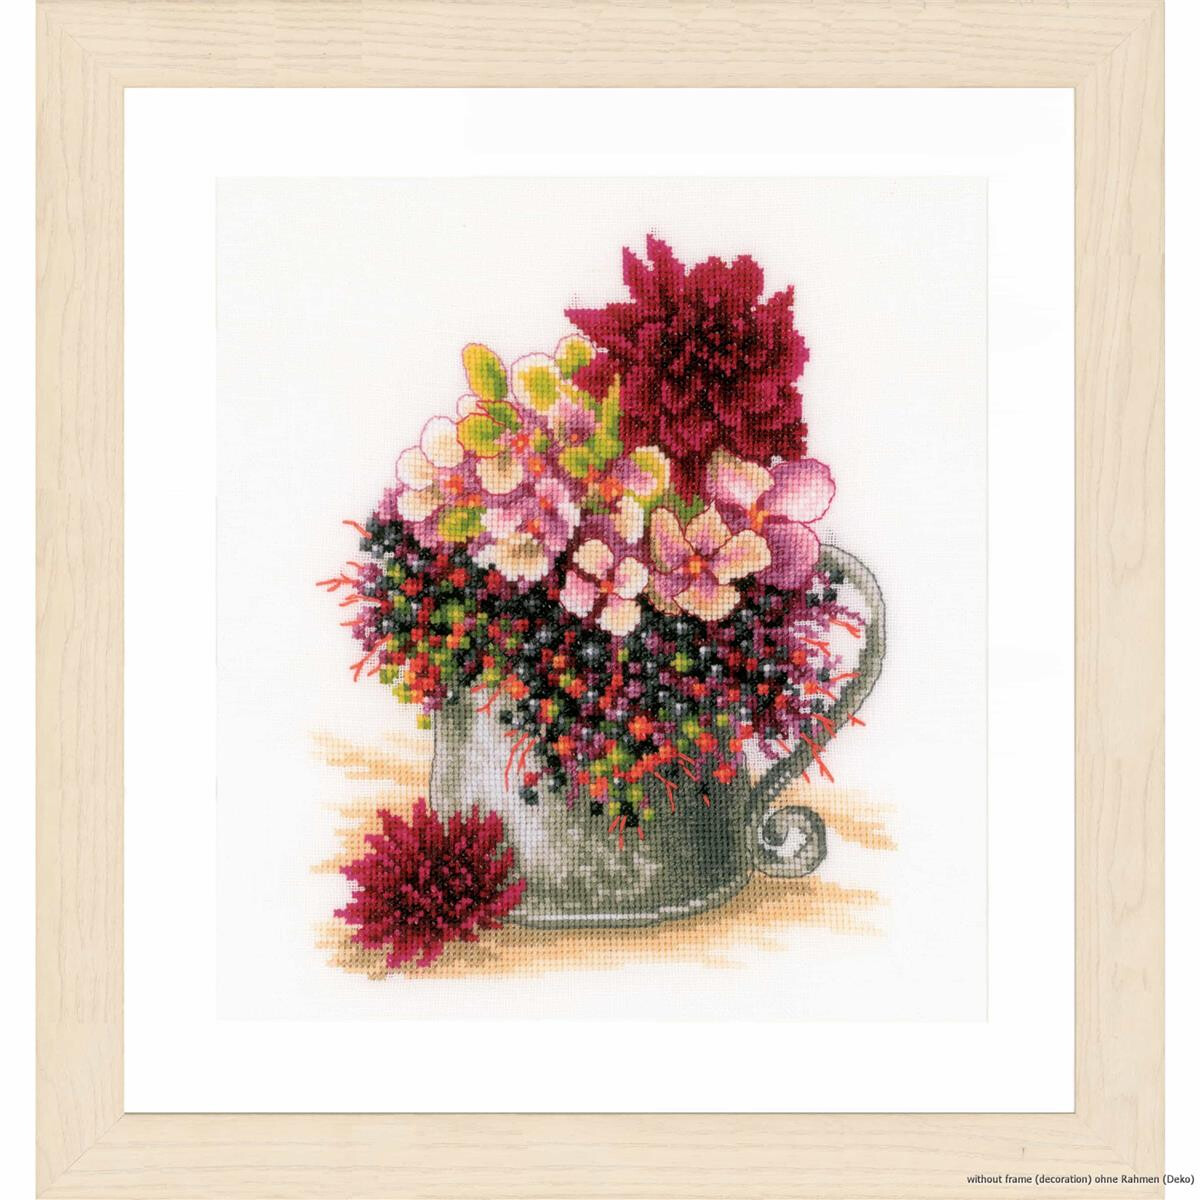 A framed floral cross stitch pattern **(embroidery...